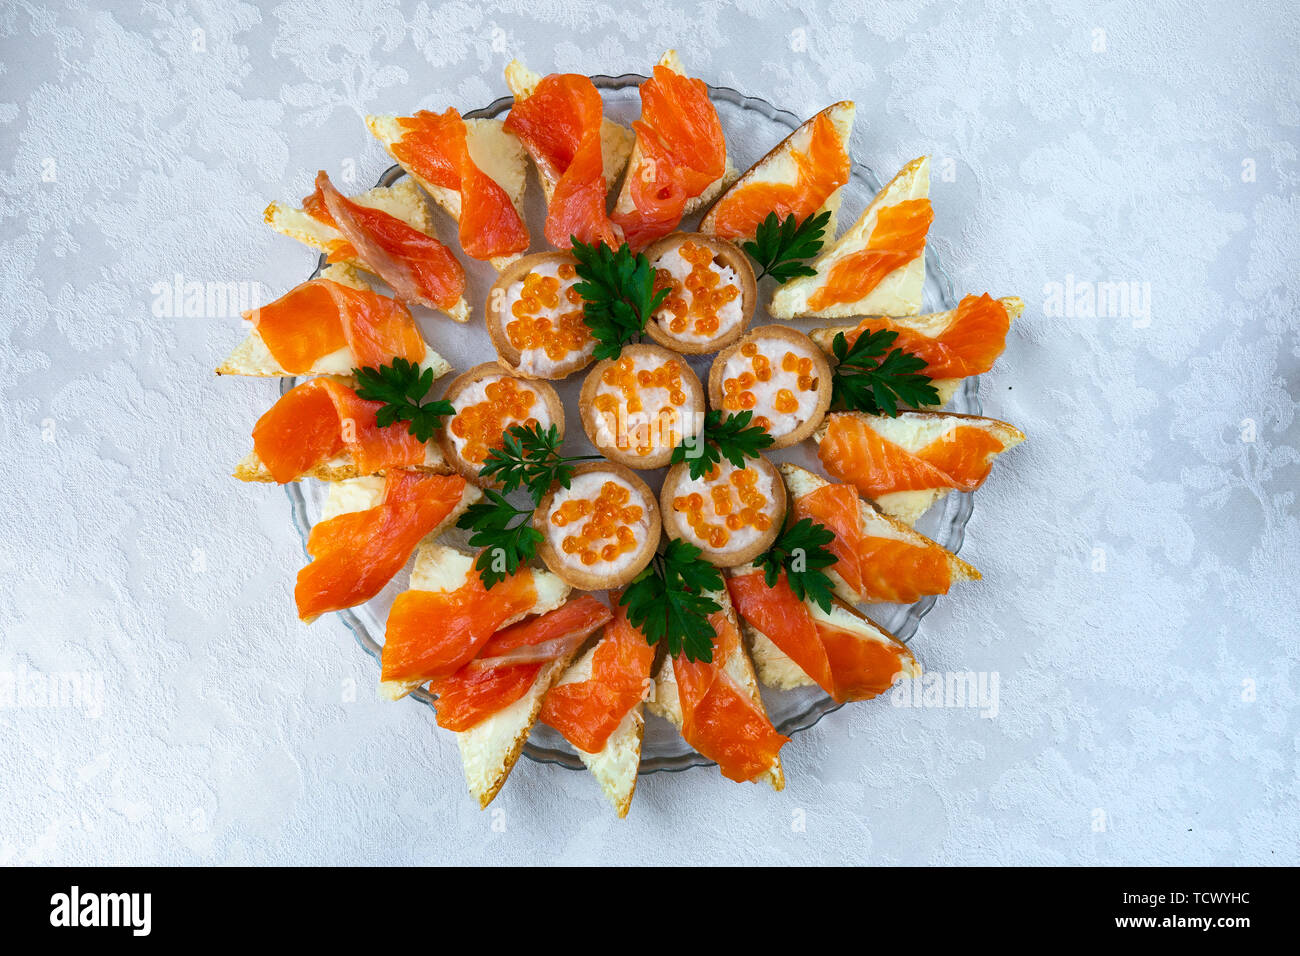 sandwiches with red fish and caviar on a plate close-up Stock Photo